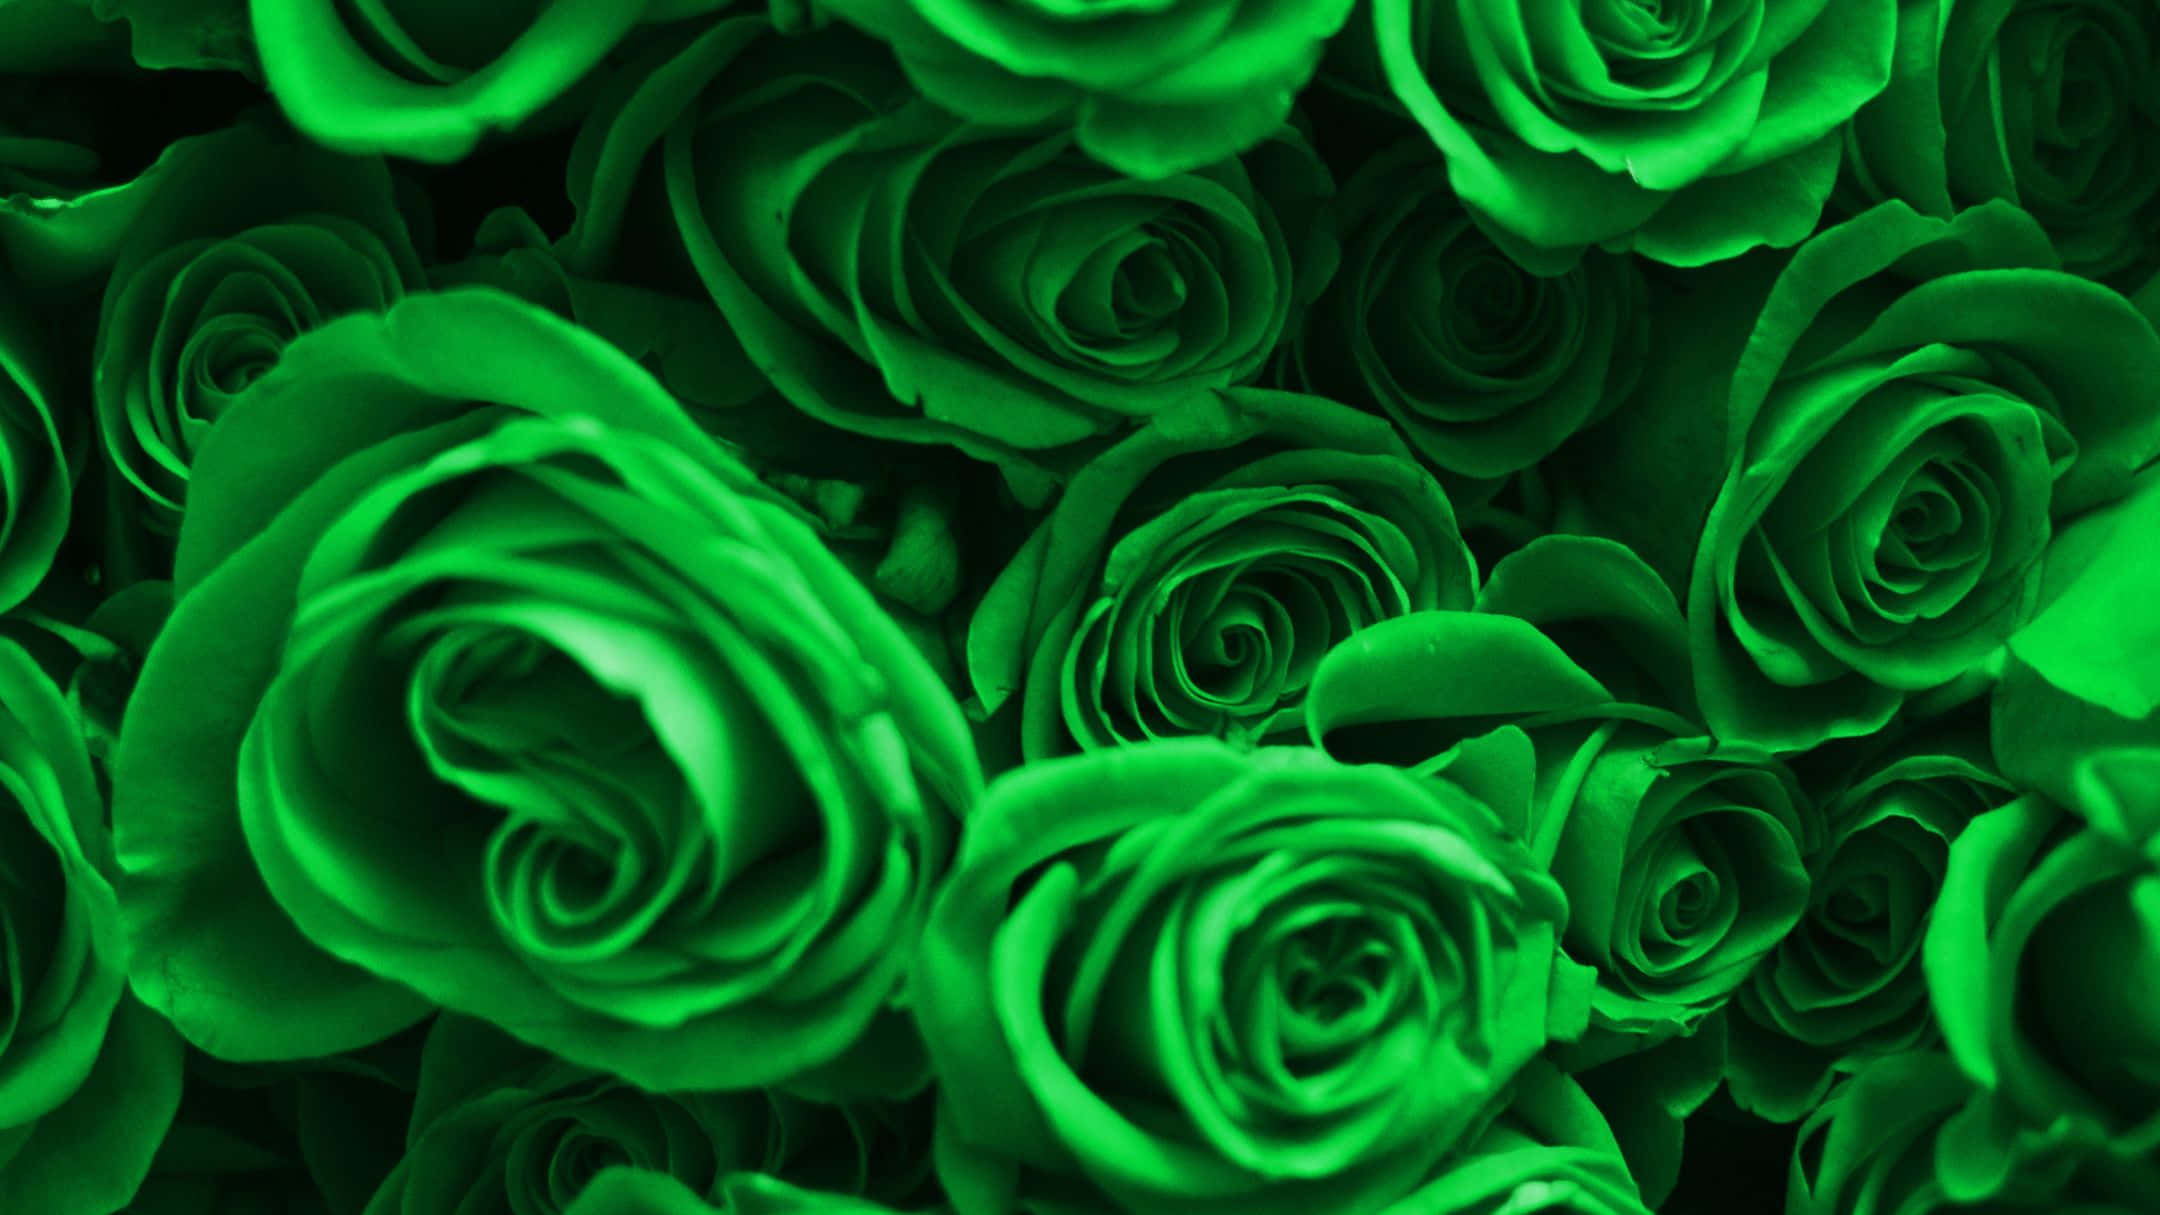 Green Floral Background with a Vibrant Nature Theme